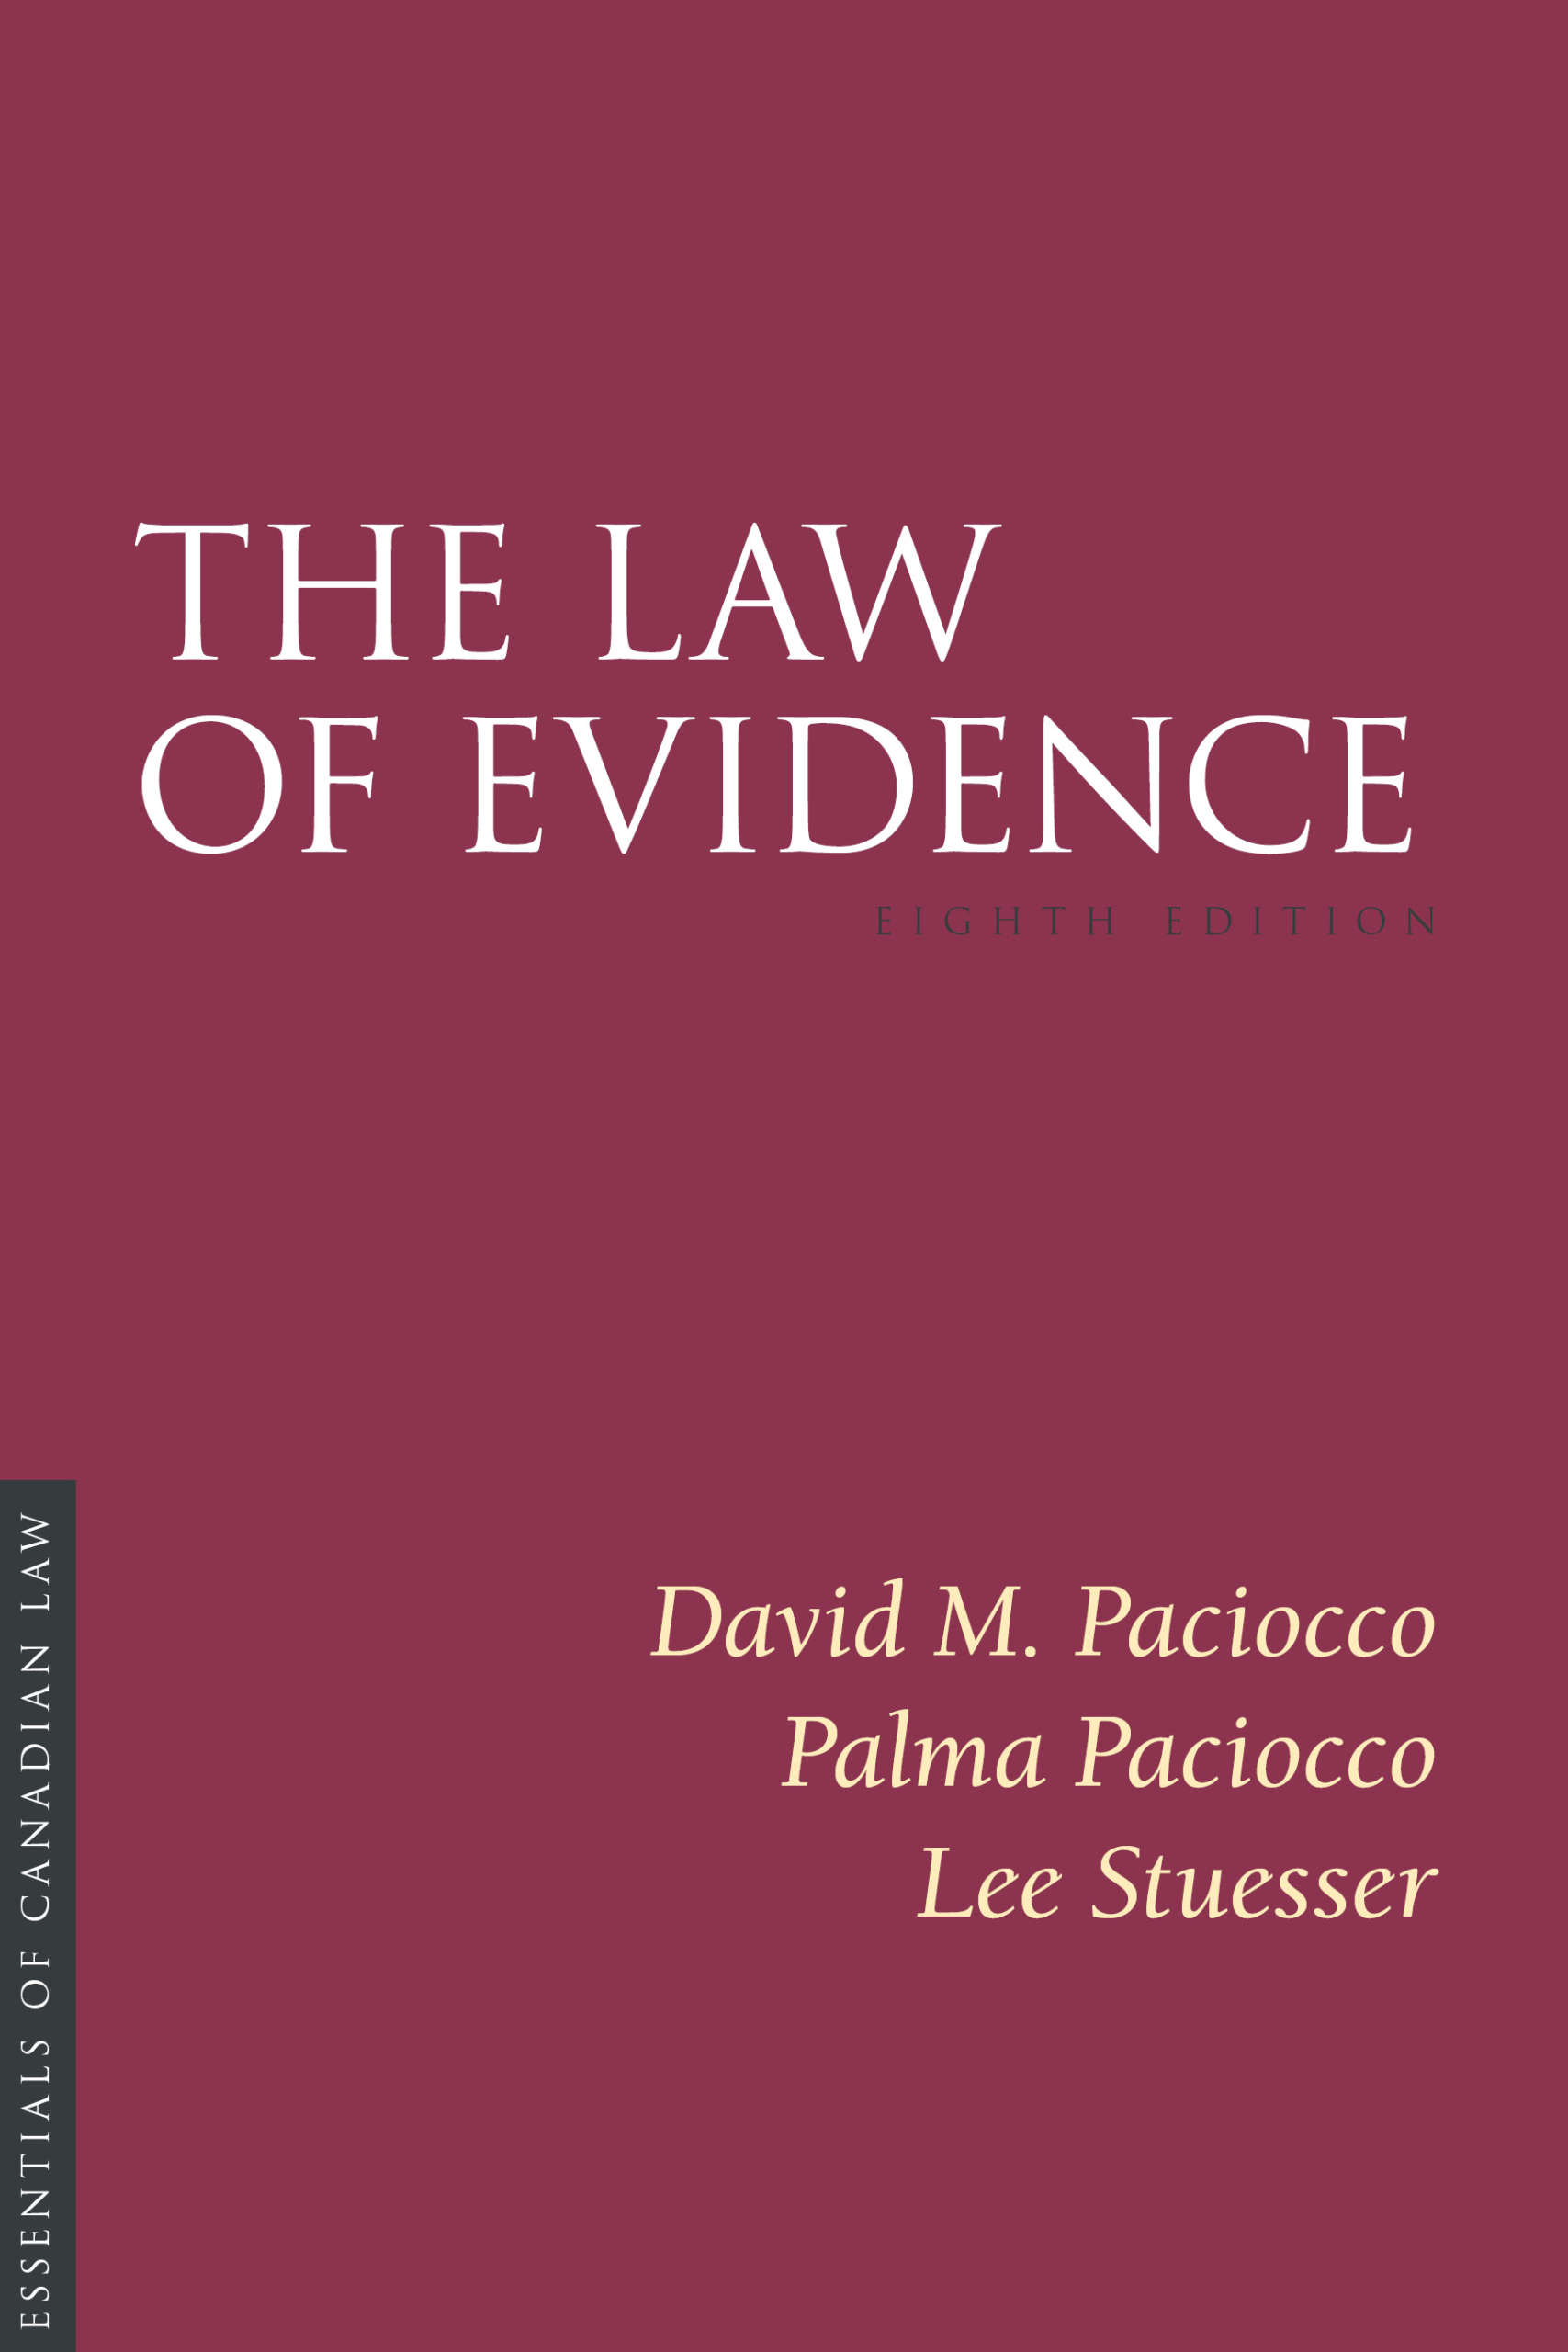 research topics on law of evidence